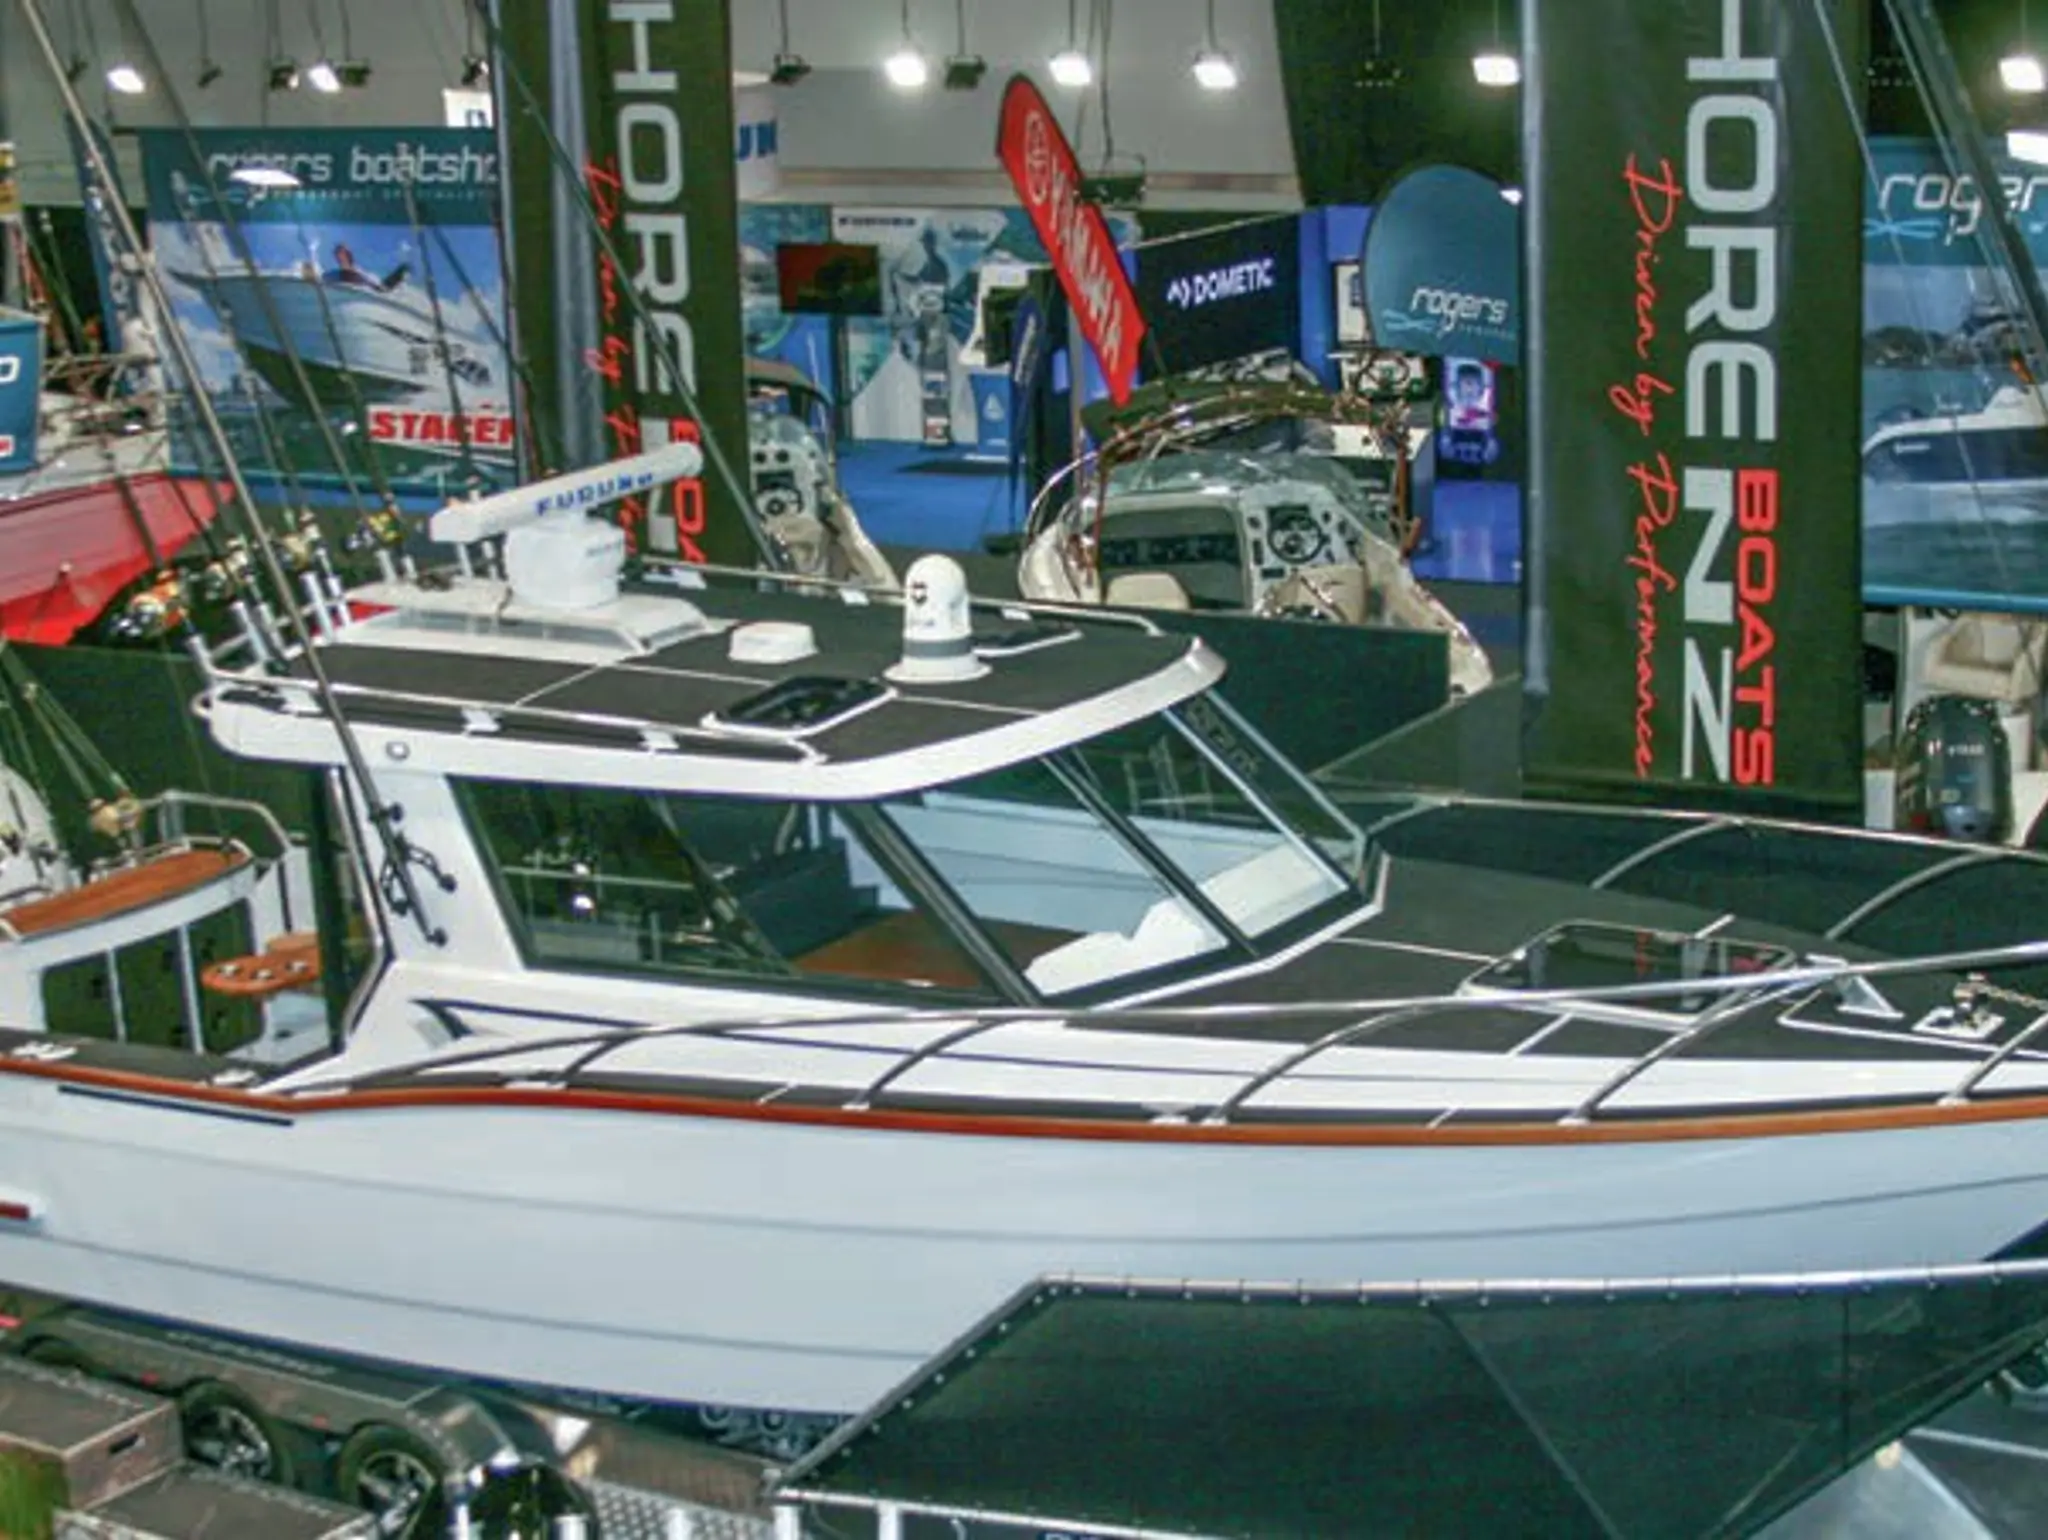 BOAT OF THE SHOW HONOURS TO CIRCA 950